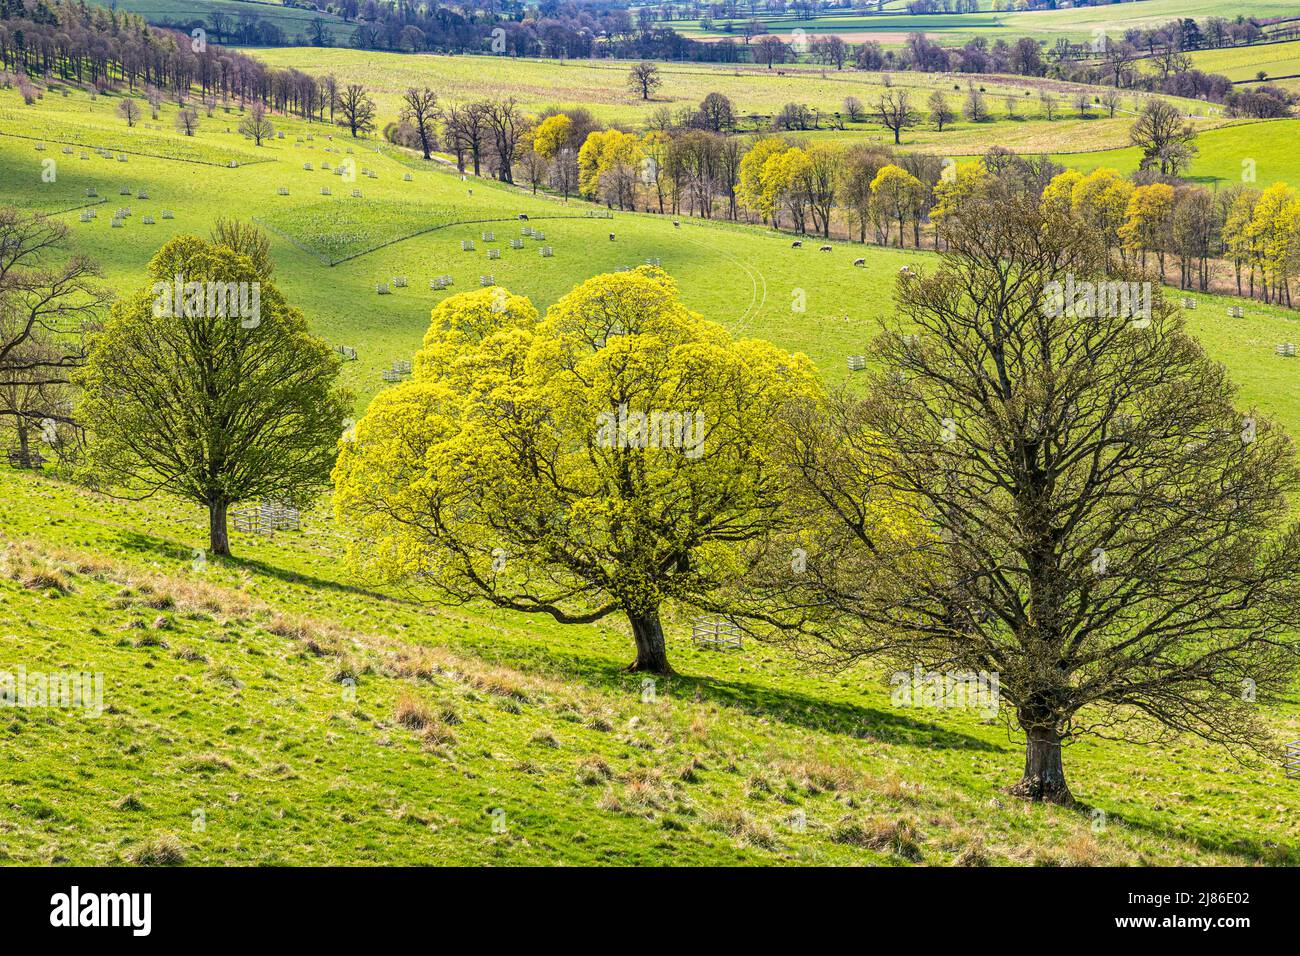 Trees coming into leaf in springtime at Lowther in the English Lake District National Park near Penrith, Cumbria, England UK Stock Photo